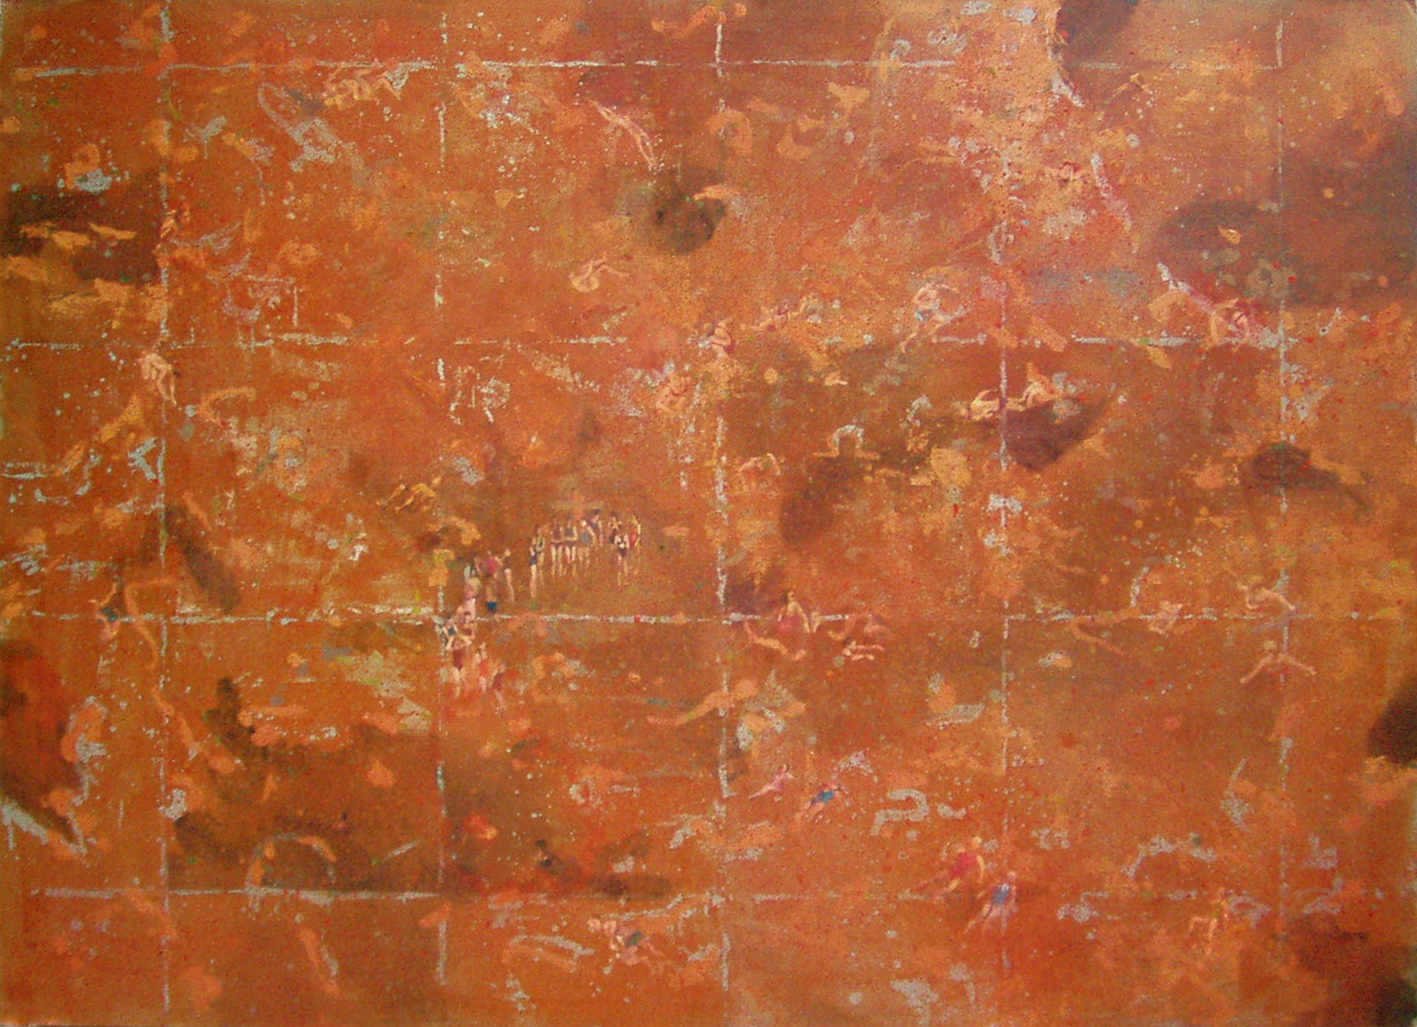 Red pool, 2009, oil on canvas, 140 x 190 cm